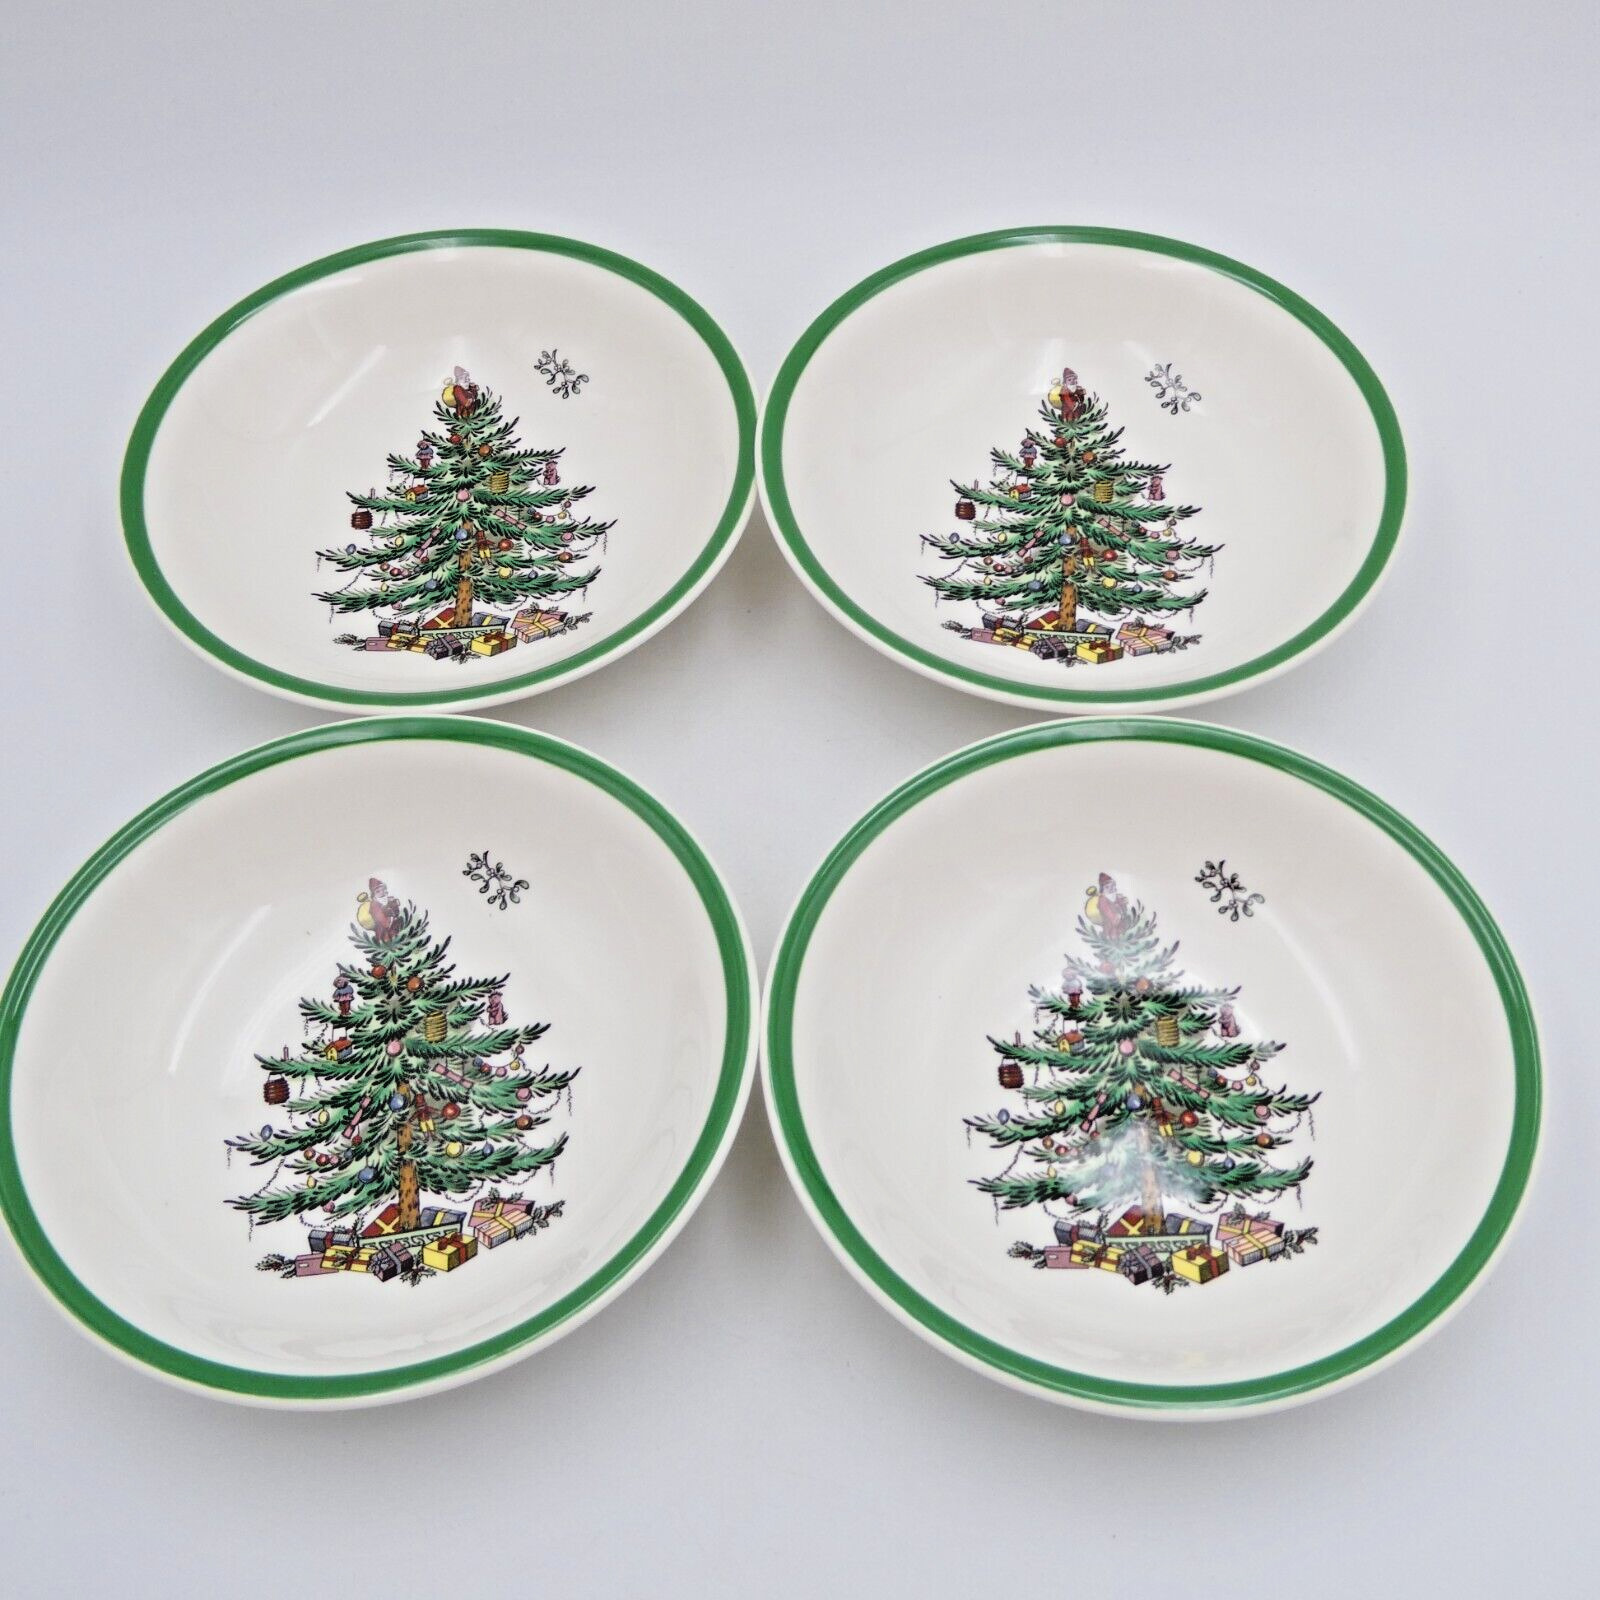 Spode Christmas Tree Coupe Cereal Bowl 6.25 inch Green Trim Set of 4 England